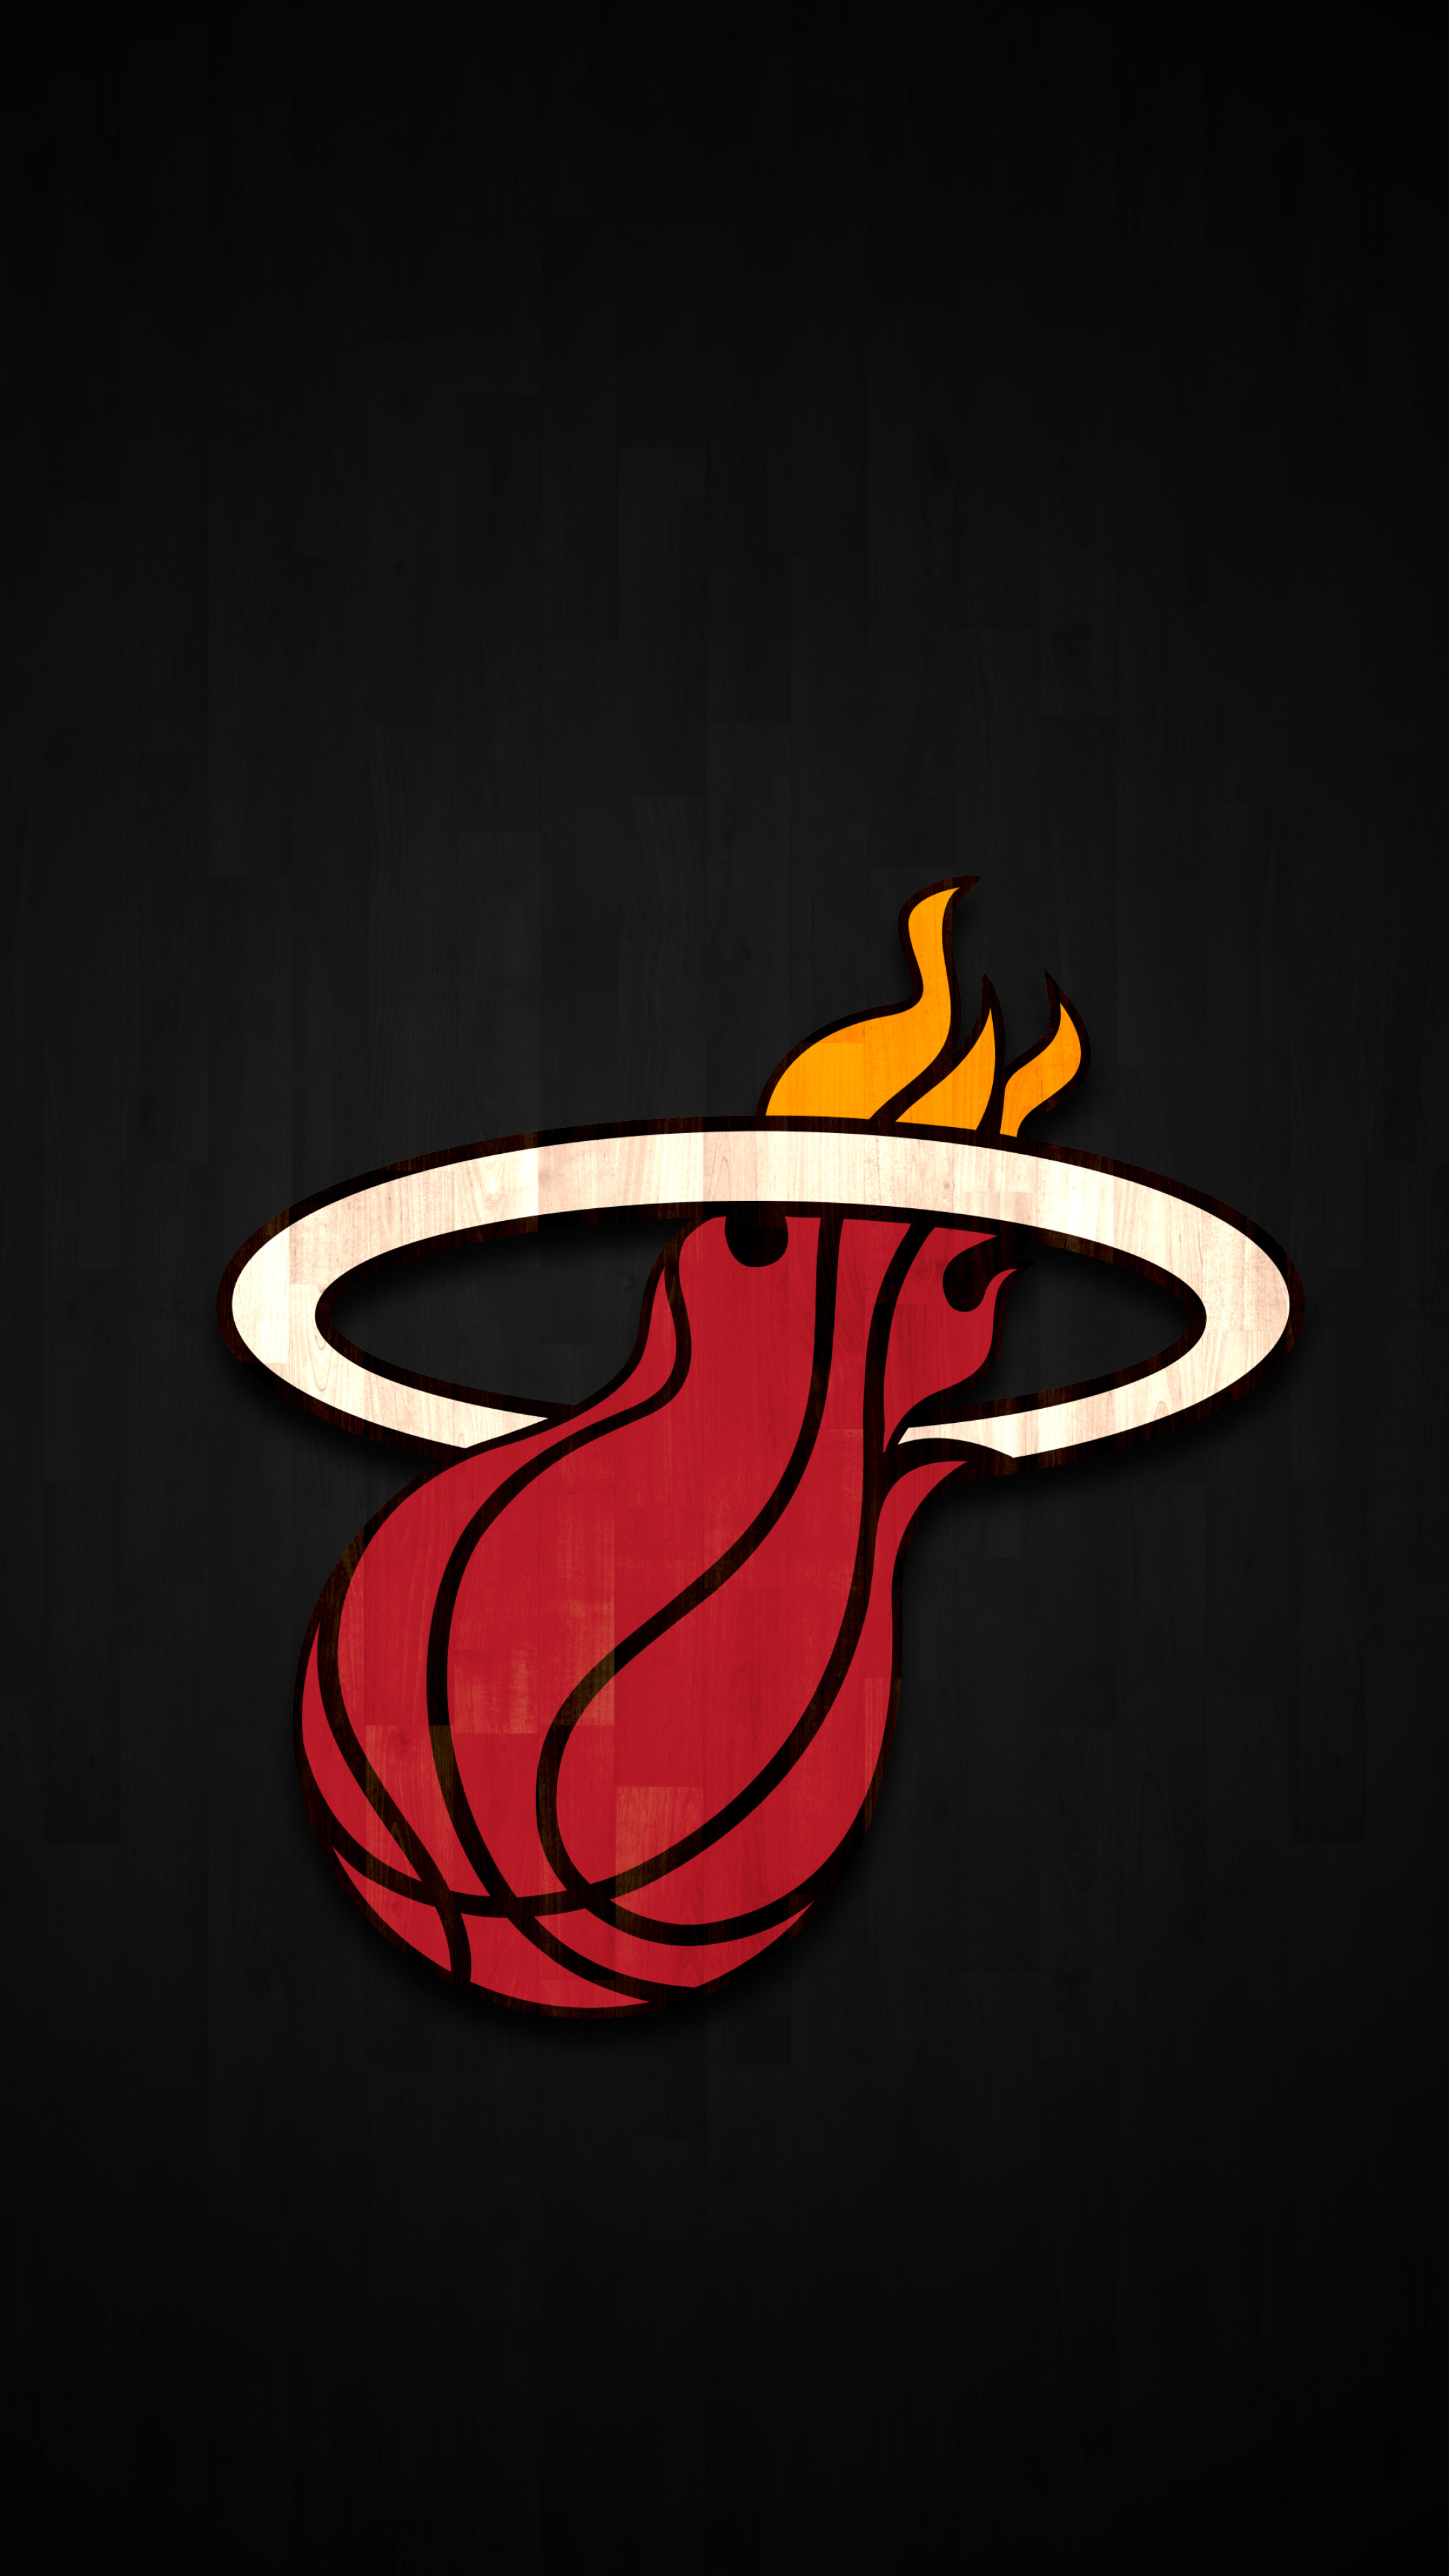 Miami Heat: Pat Riley became team president and head coach in the mid-1990s. 2160x3840 4K Background.